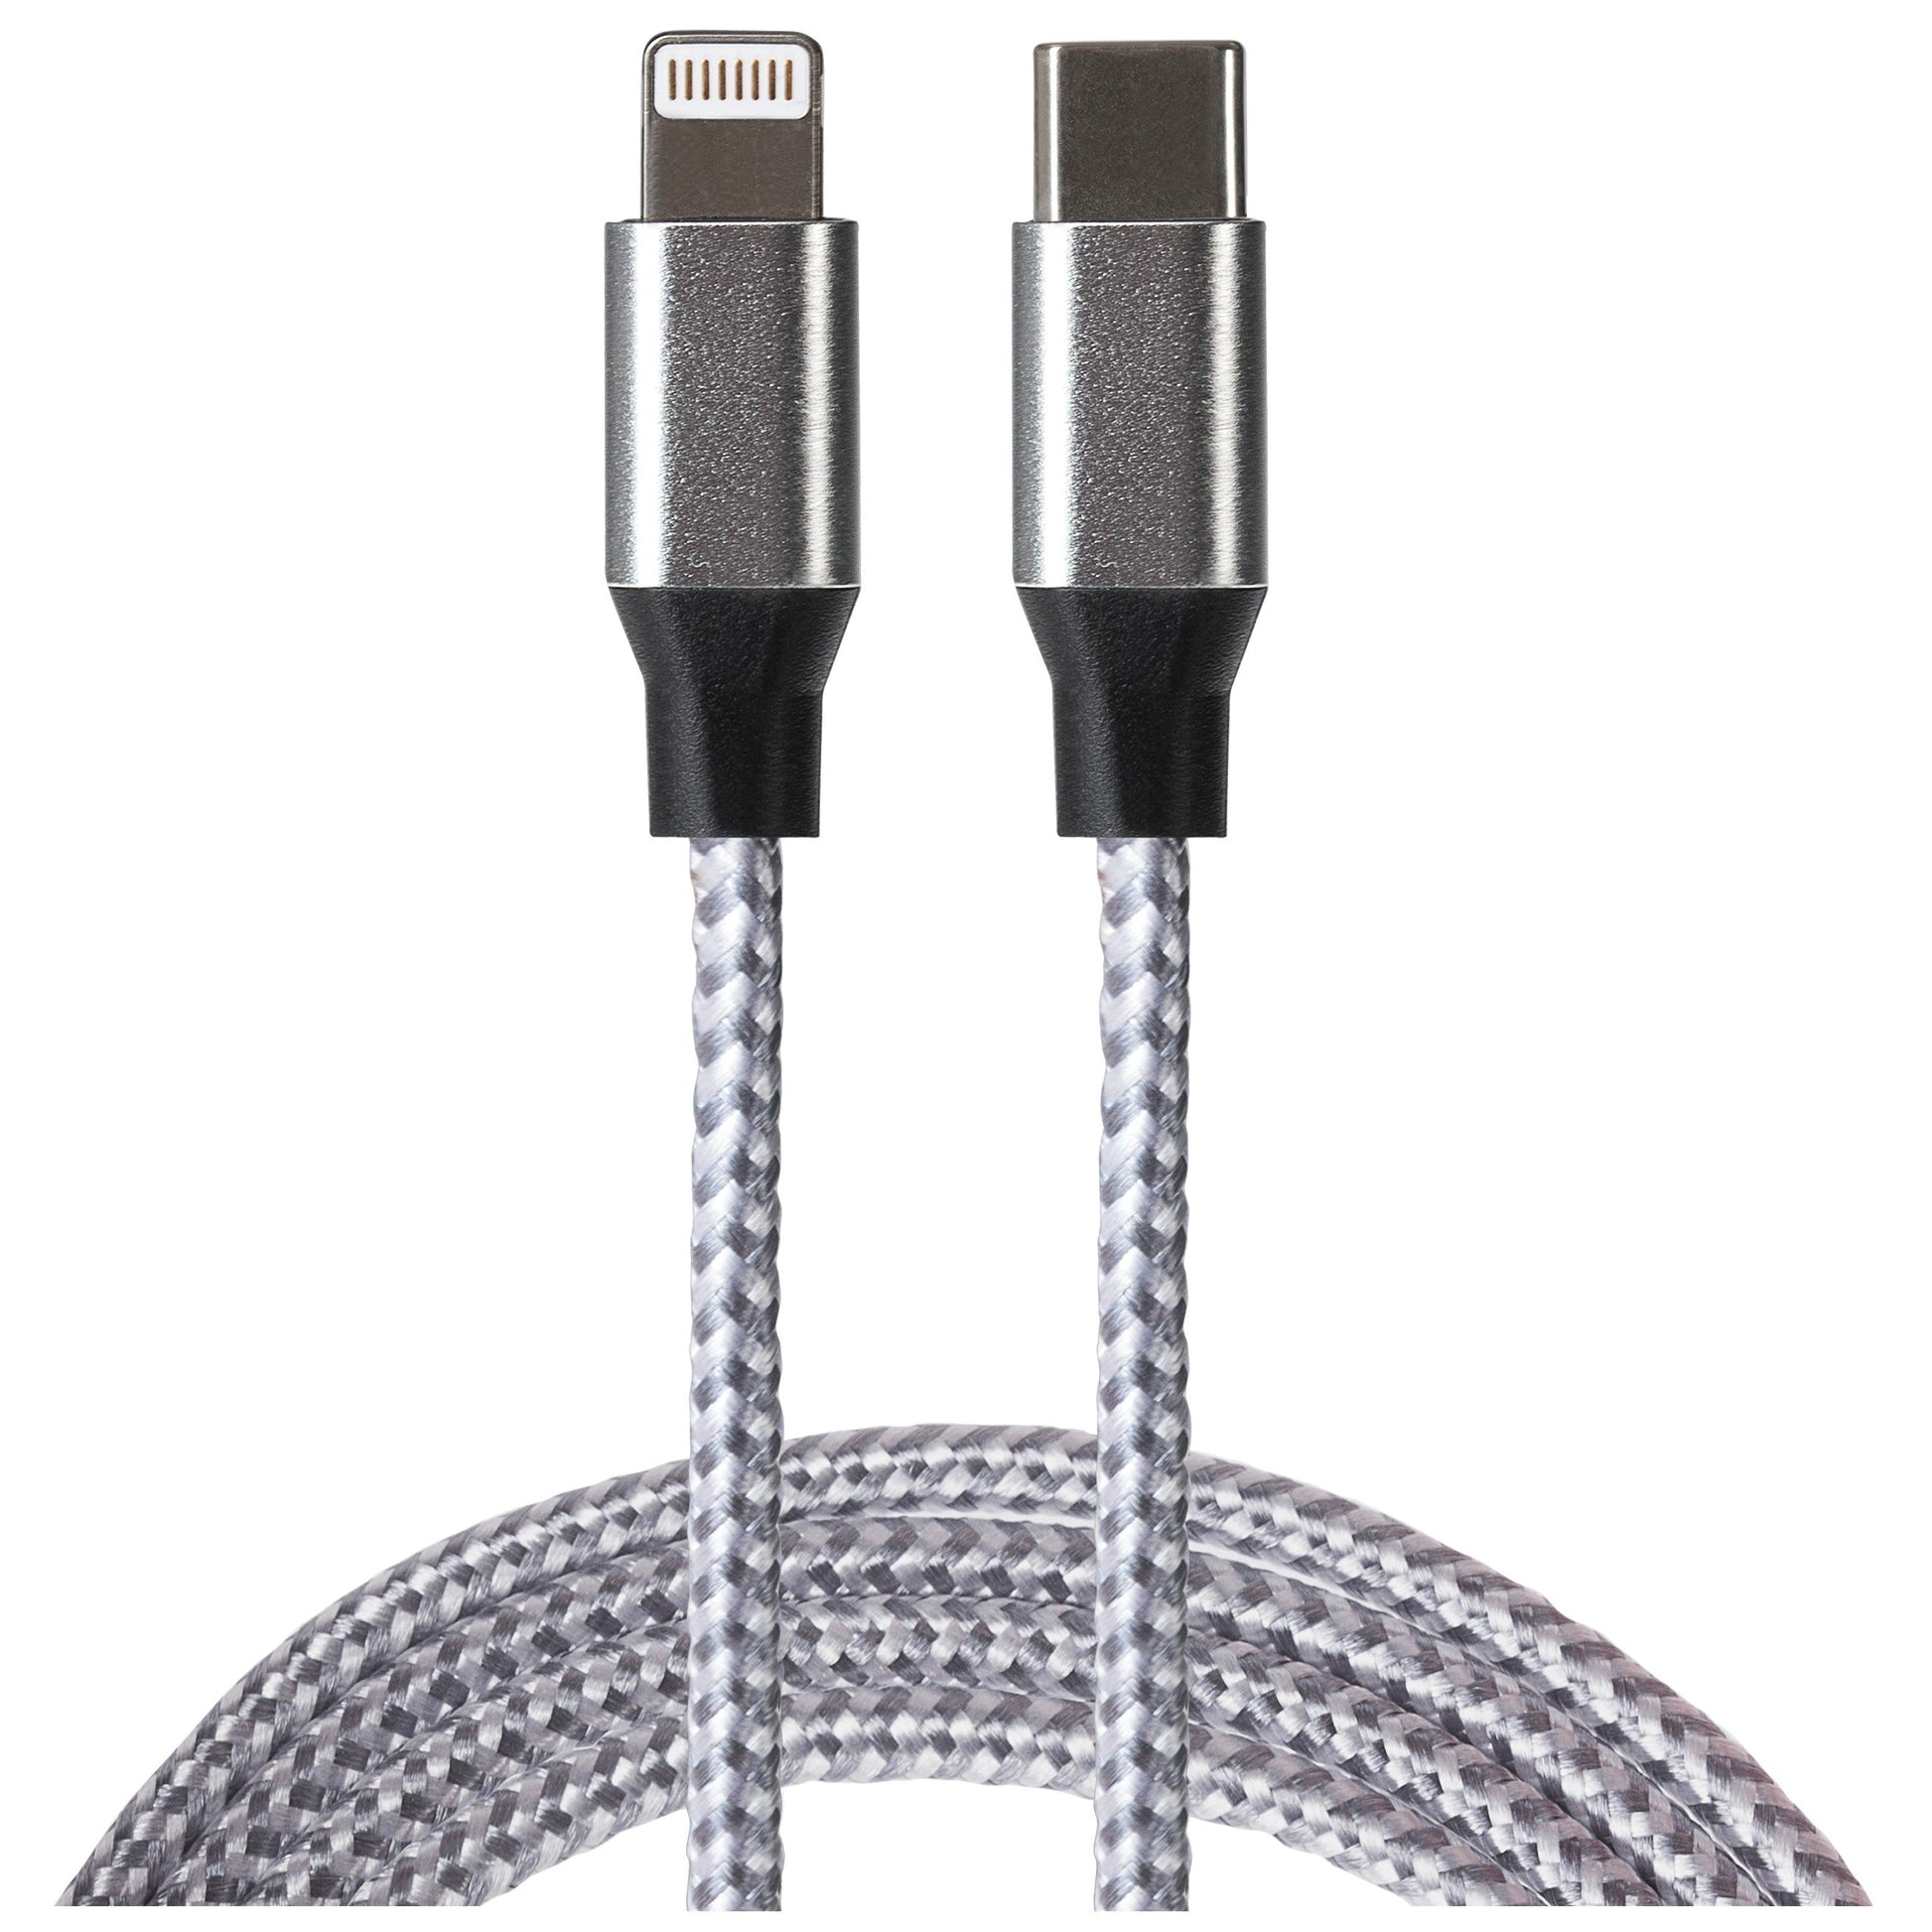 iPad Pro and iPad Now Include Woven USB-C Cable, Also Sold